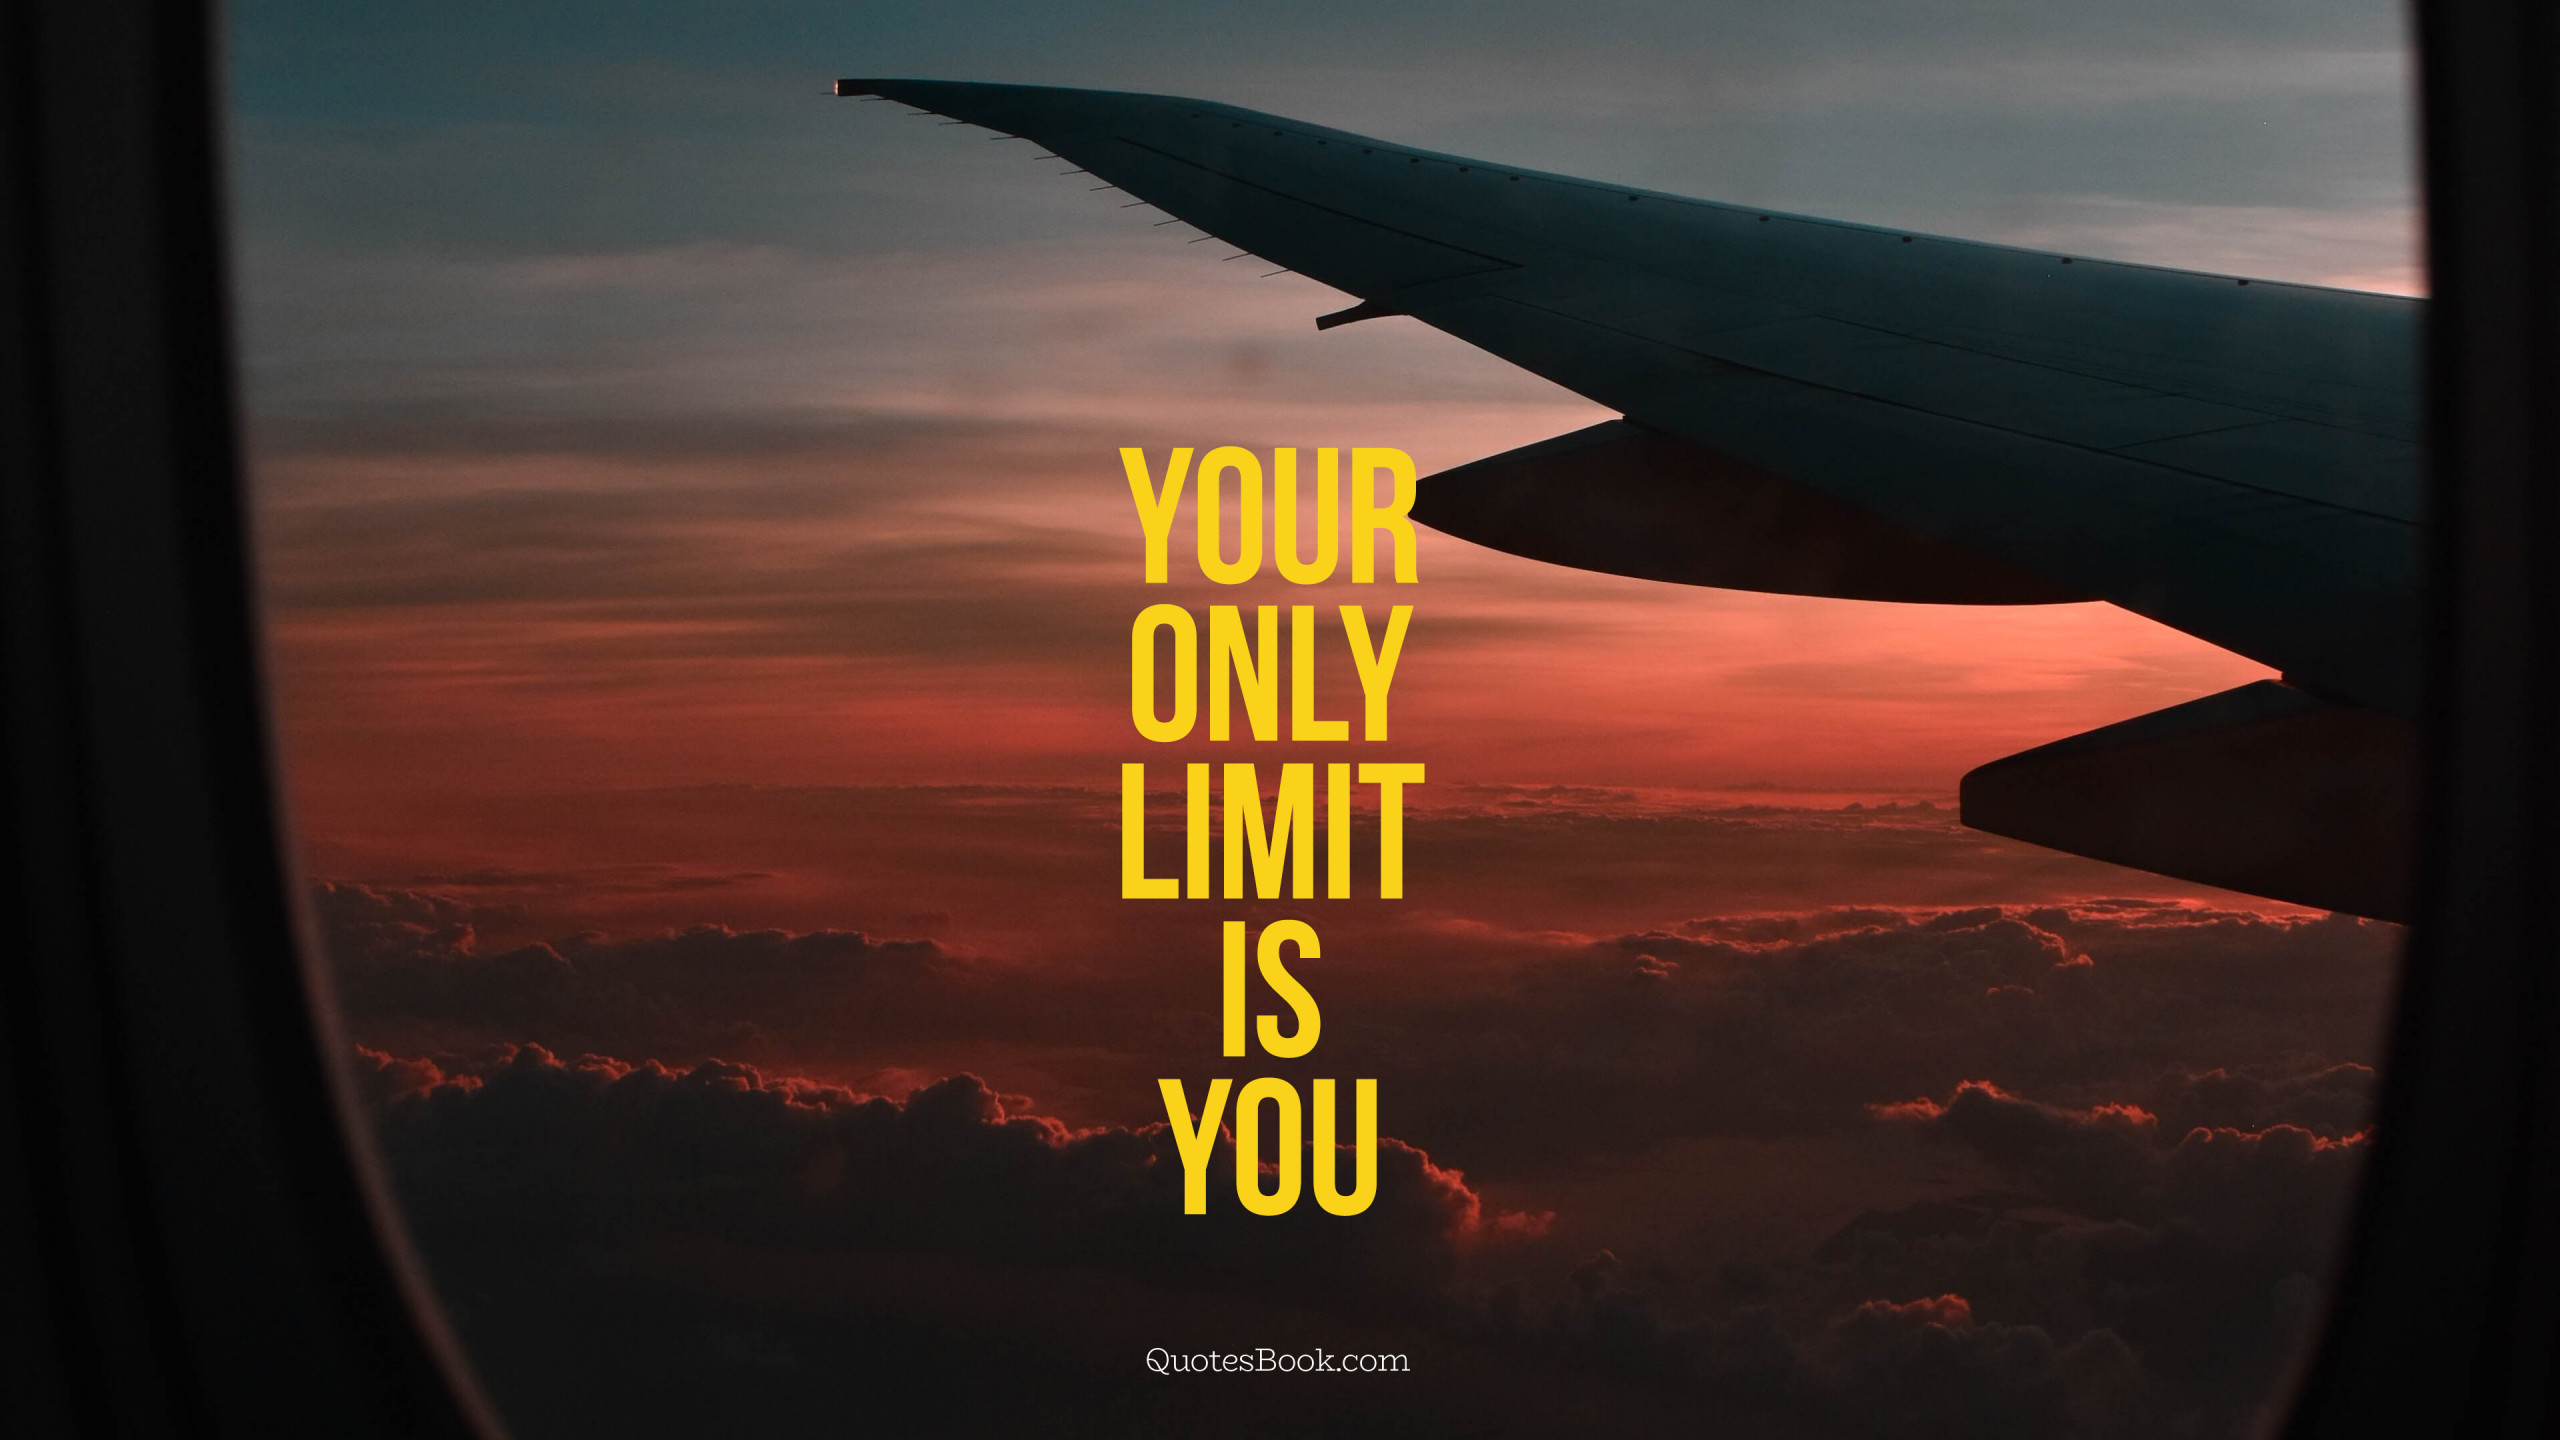 Your only limit is you - QuotesBook